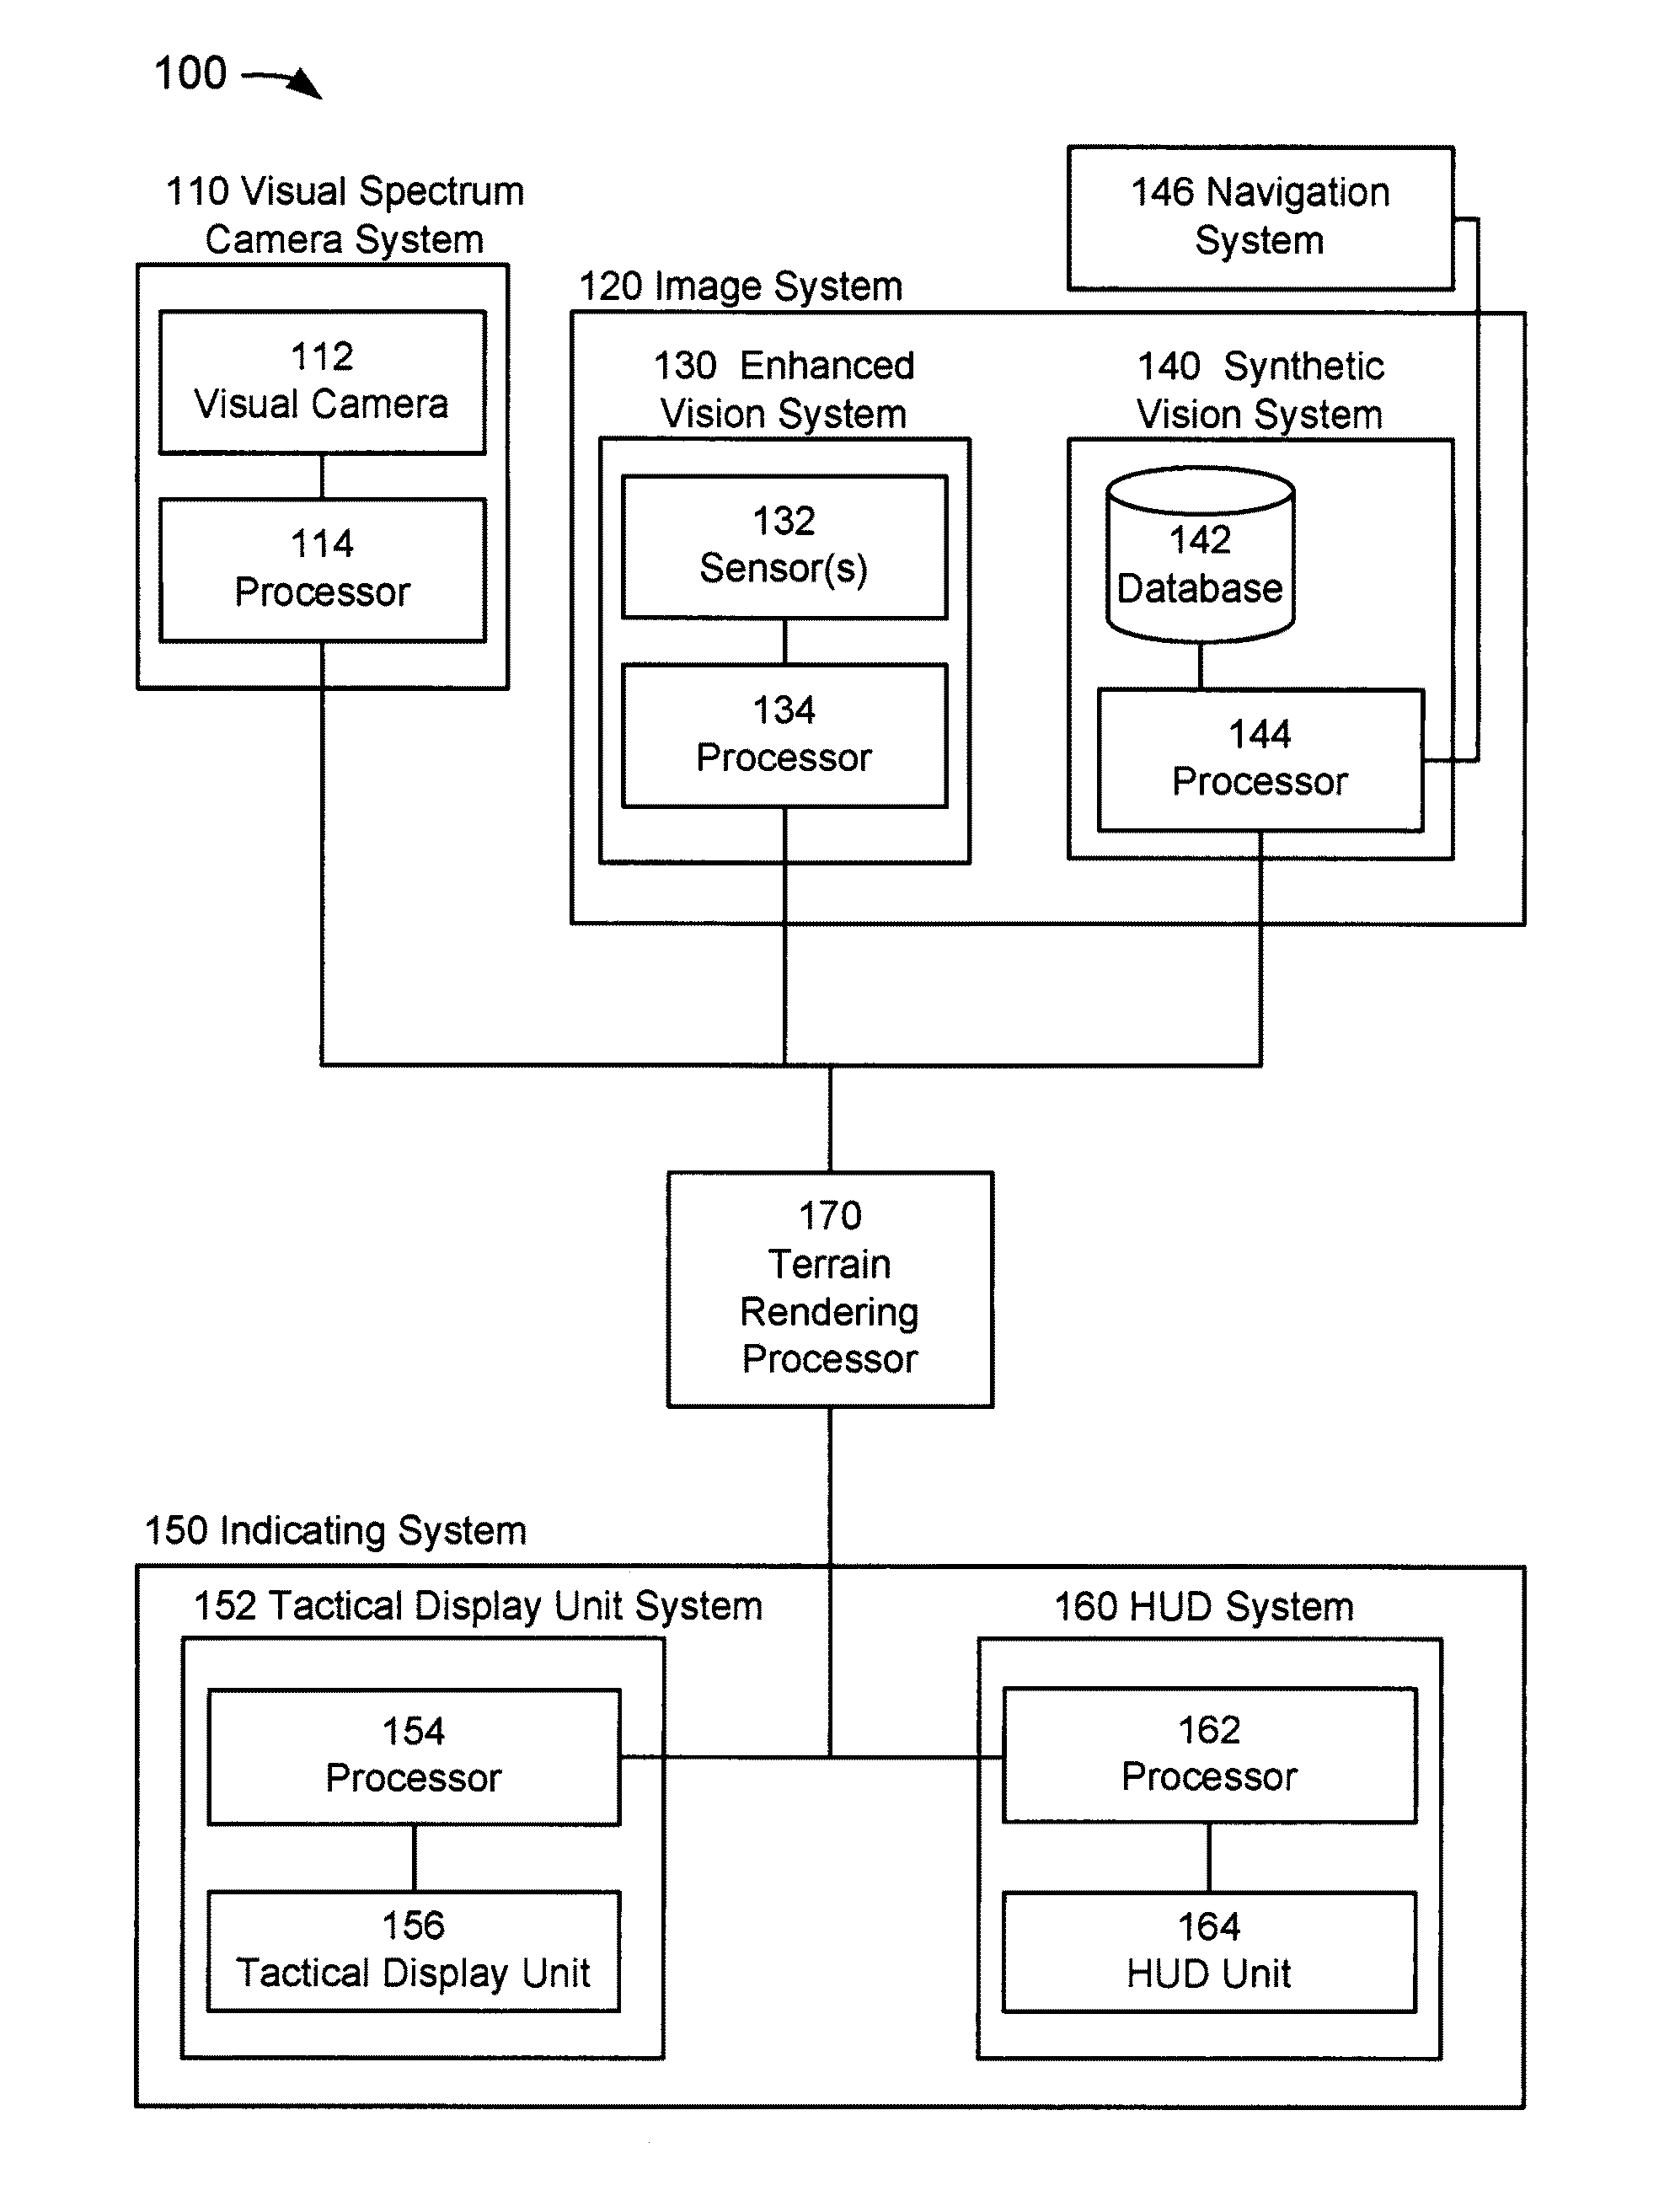 System and methods for displaying a partial images and non-overlapping, shared-screen partial images acquired from vision systems